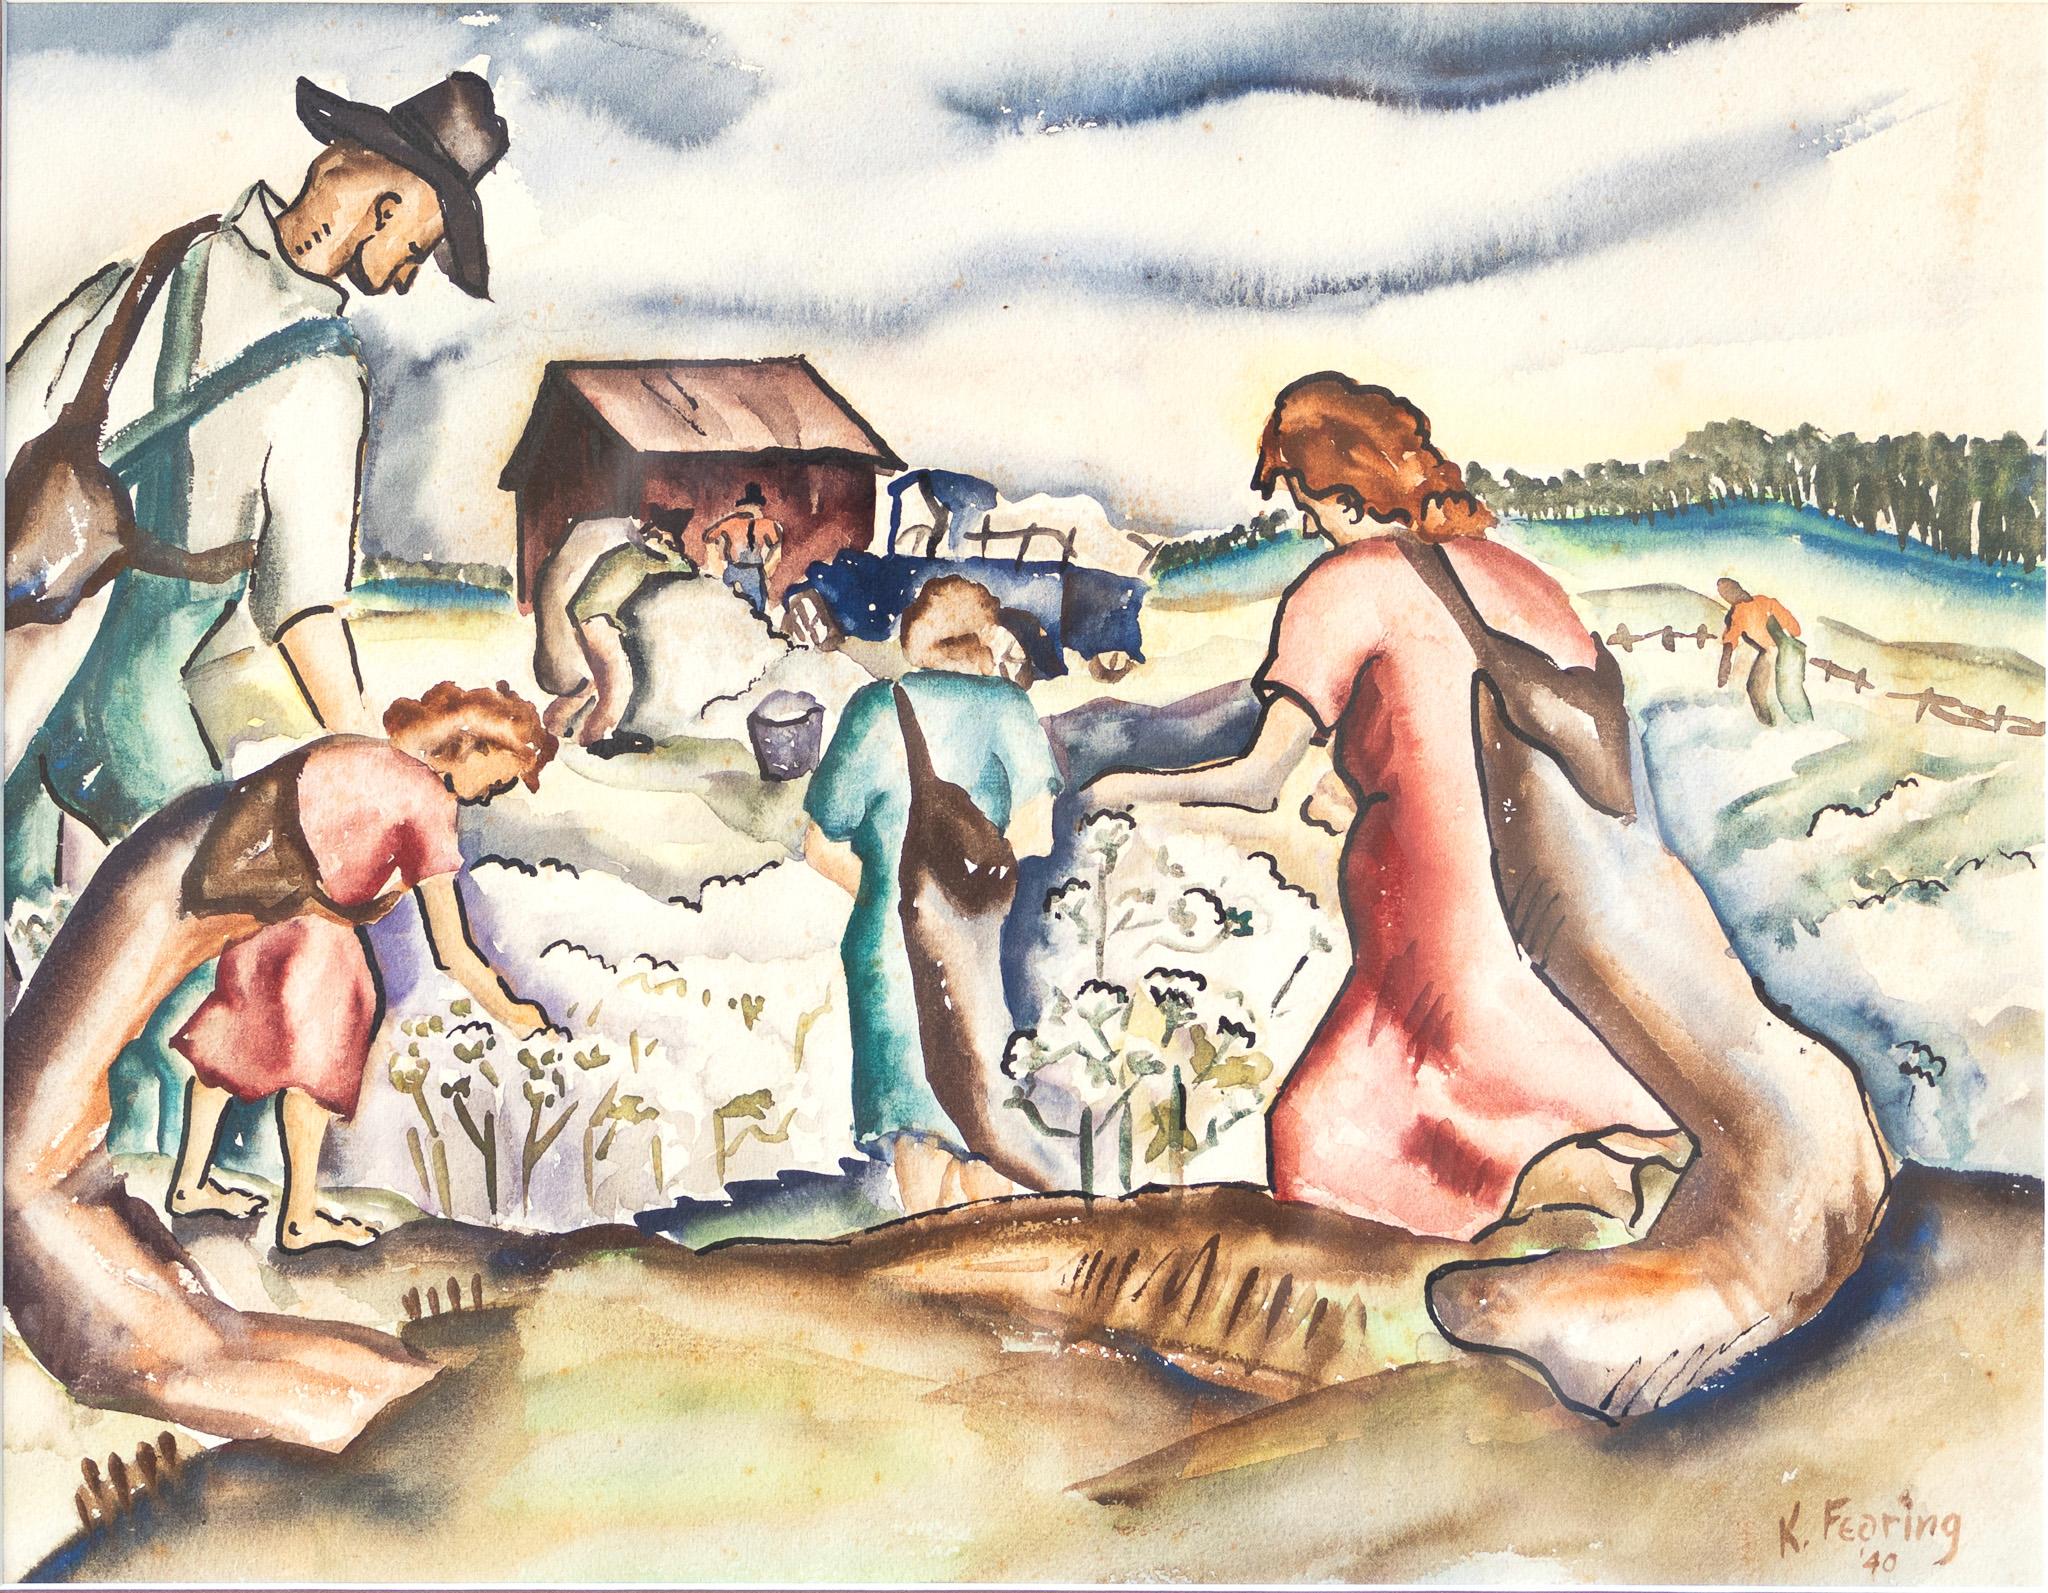 "Sharecroppers" Watercolor Scene of Laborers Working in a Cotton Field